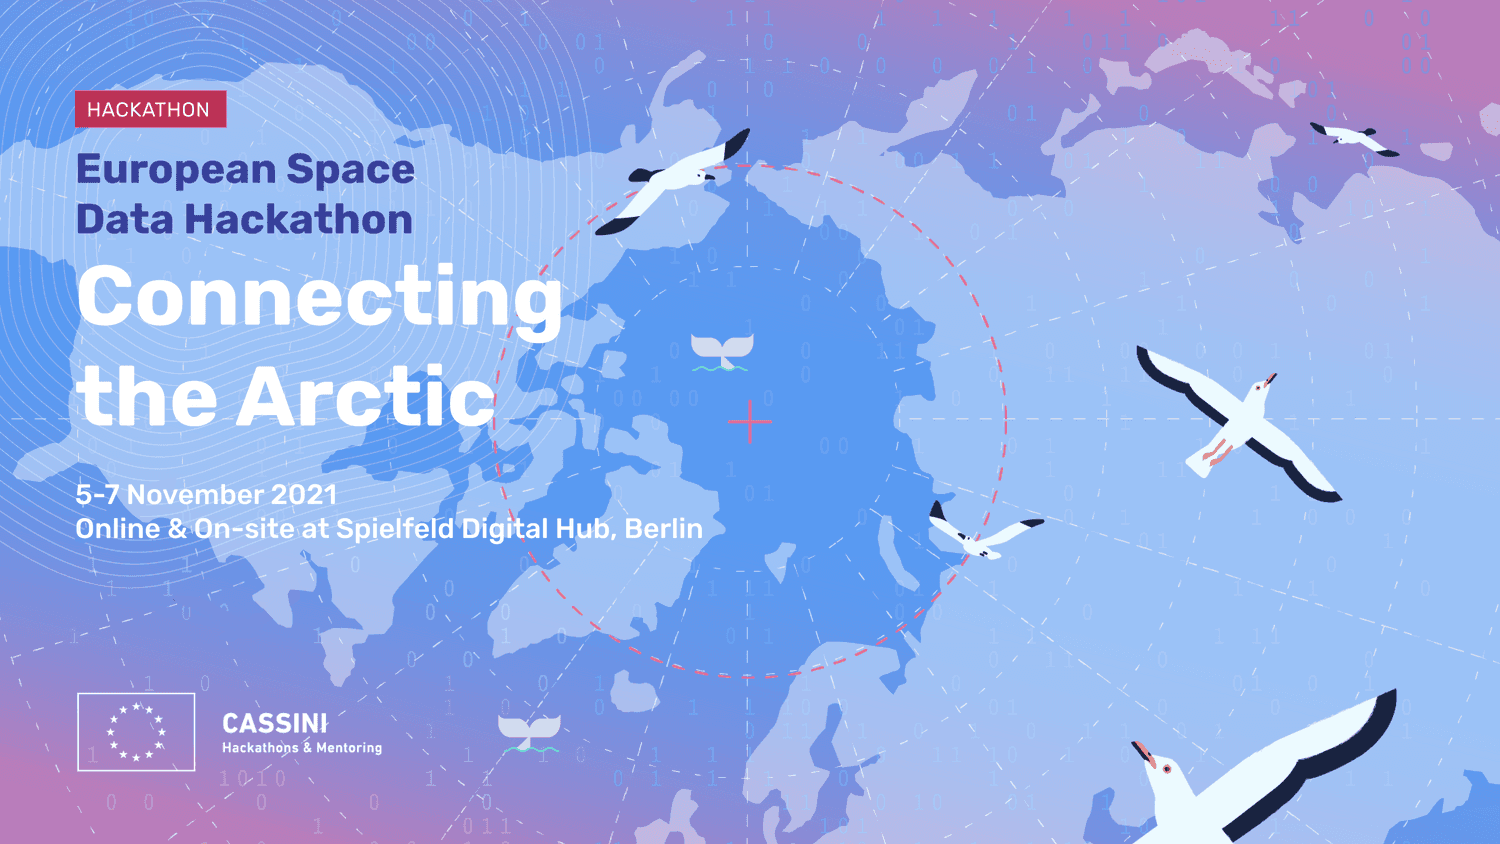 The picture shows a geographical styled worldmap with the Arctic being the center – with pictograms of birds flying over it. Besides the visual elements, there is the following text placed on the image: Hackathon, European Space Data Hackathon. Connecting the Arctic. 5-7 Nov. 2021. Online & at Spielfeld Digital Hub, Berlin. 